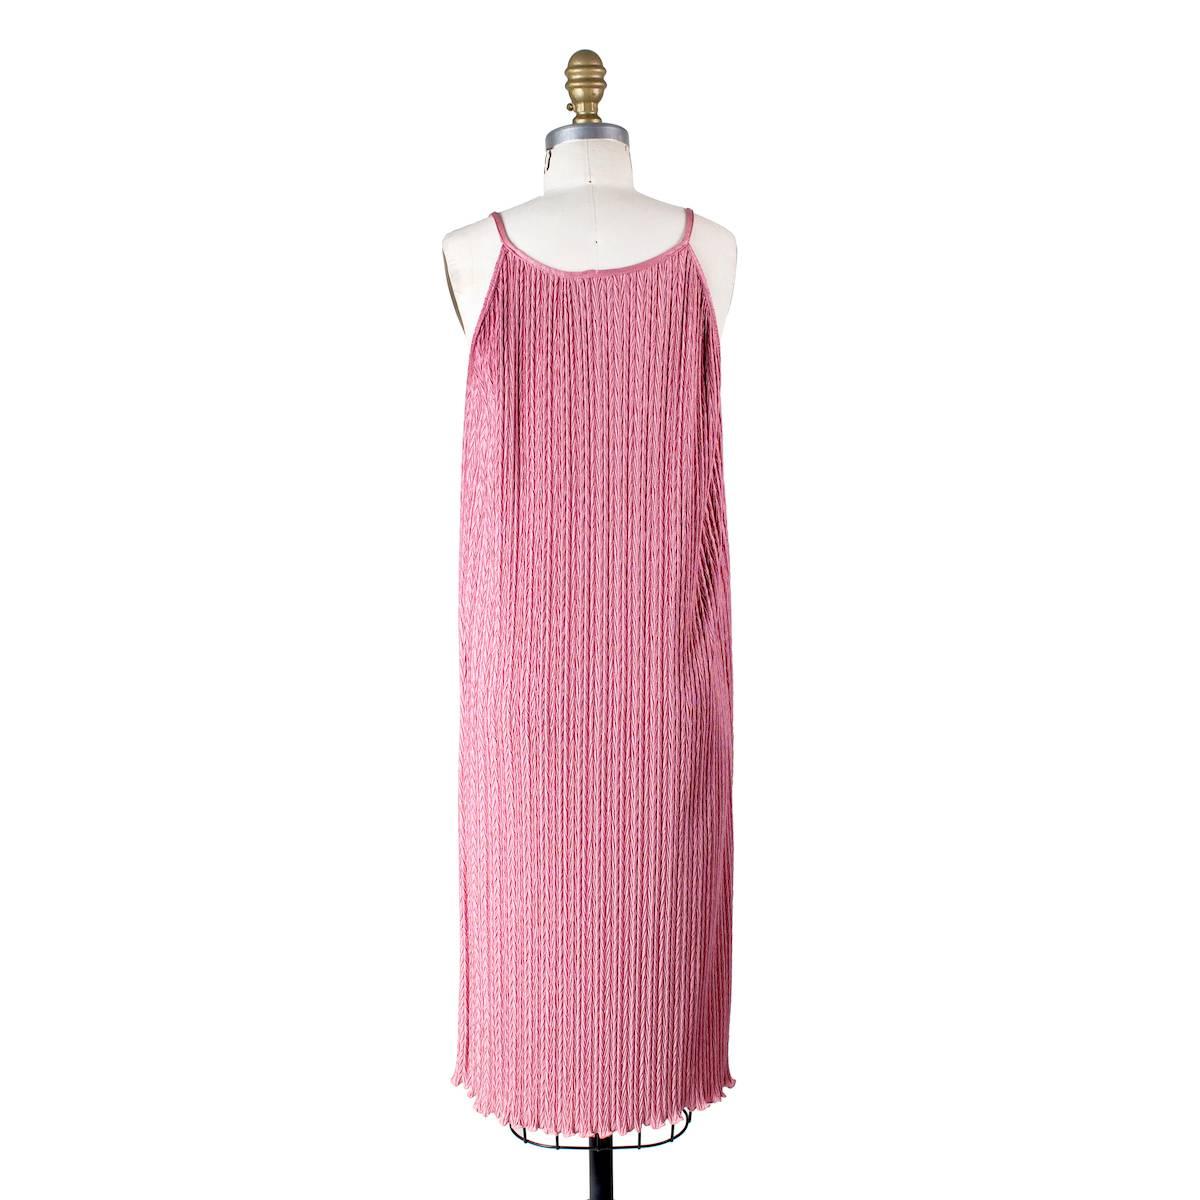 Pink Mary McFadden Dress with Rope Belt, circa 1970s